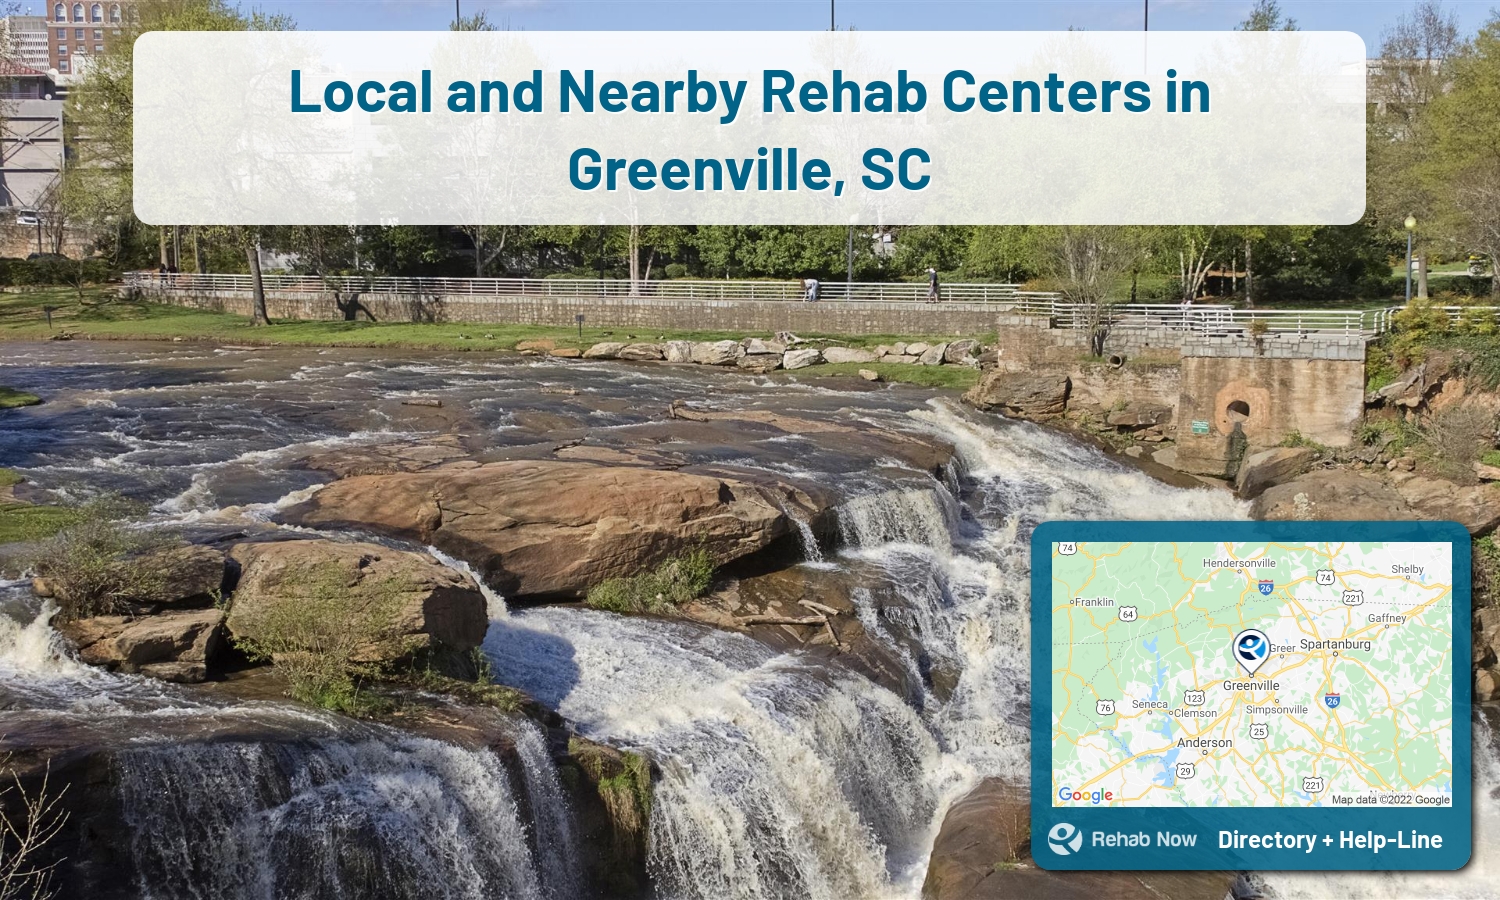 Greenville, SC Treatment Centers. Find drug rehab in Greenville, South Carolina, or detox and treatment programs. Get the right help now!